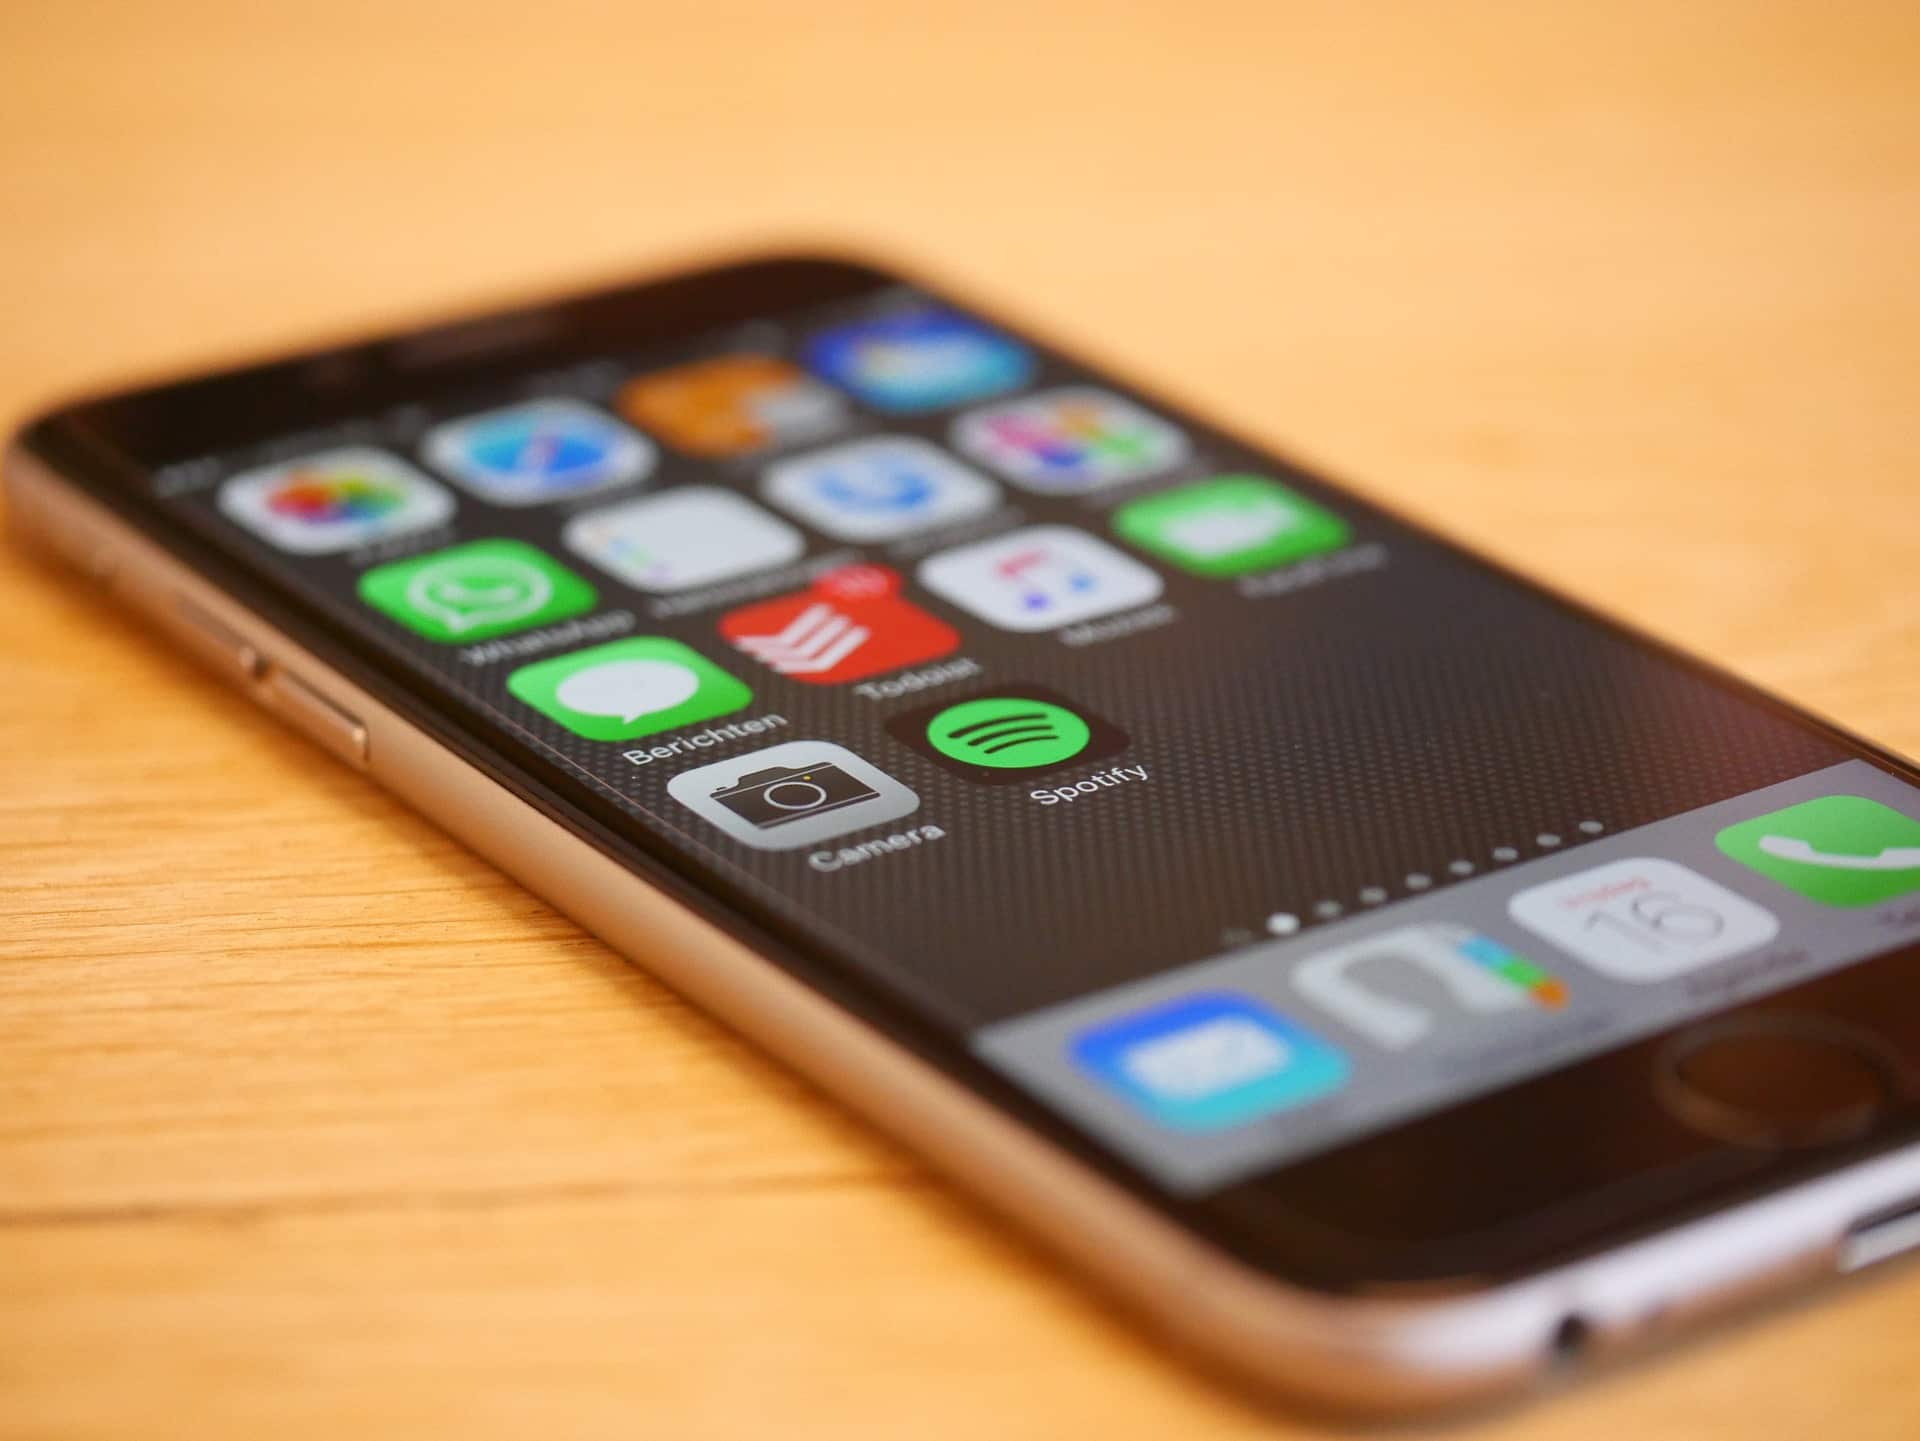 How to Update Your iPhone to iOS 9.3